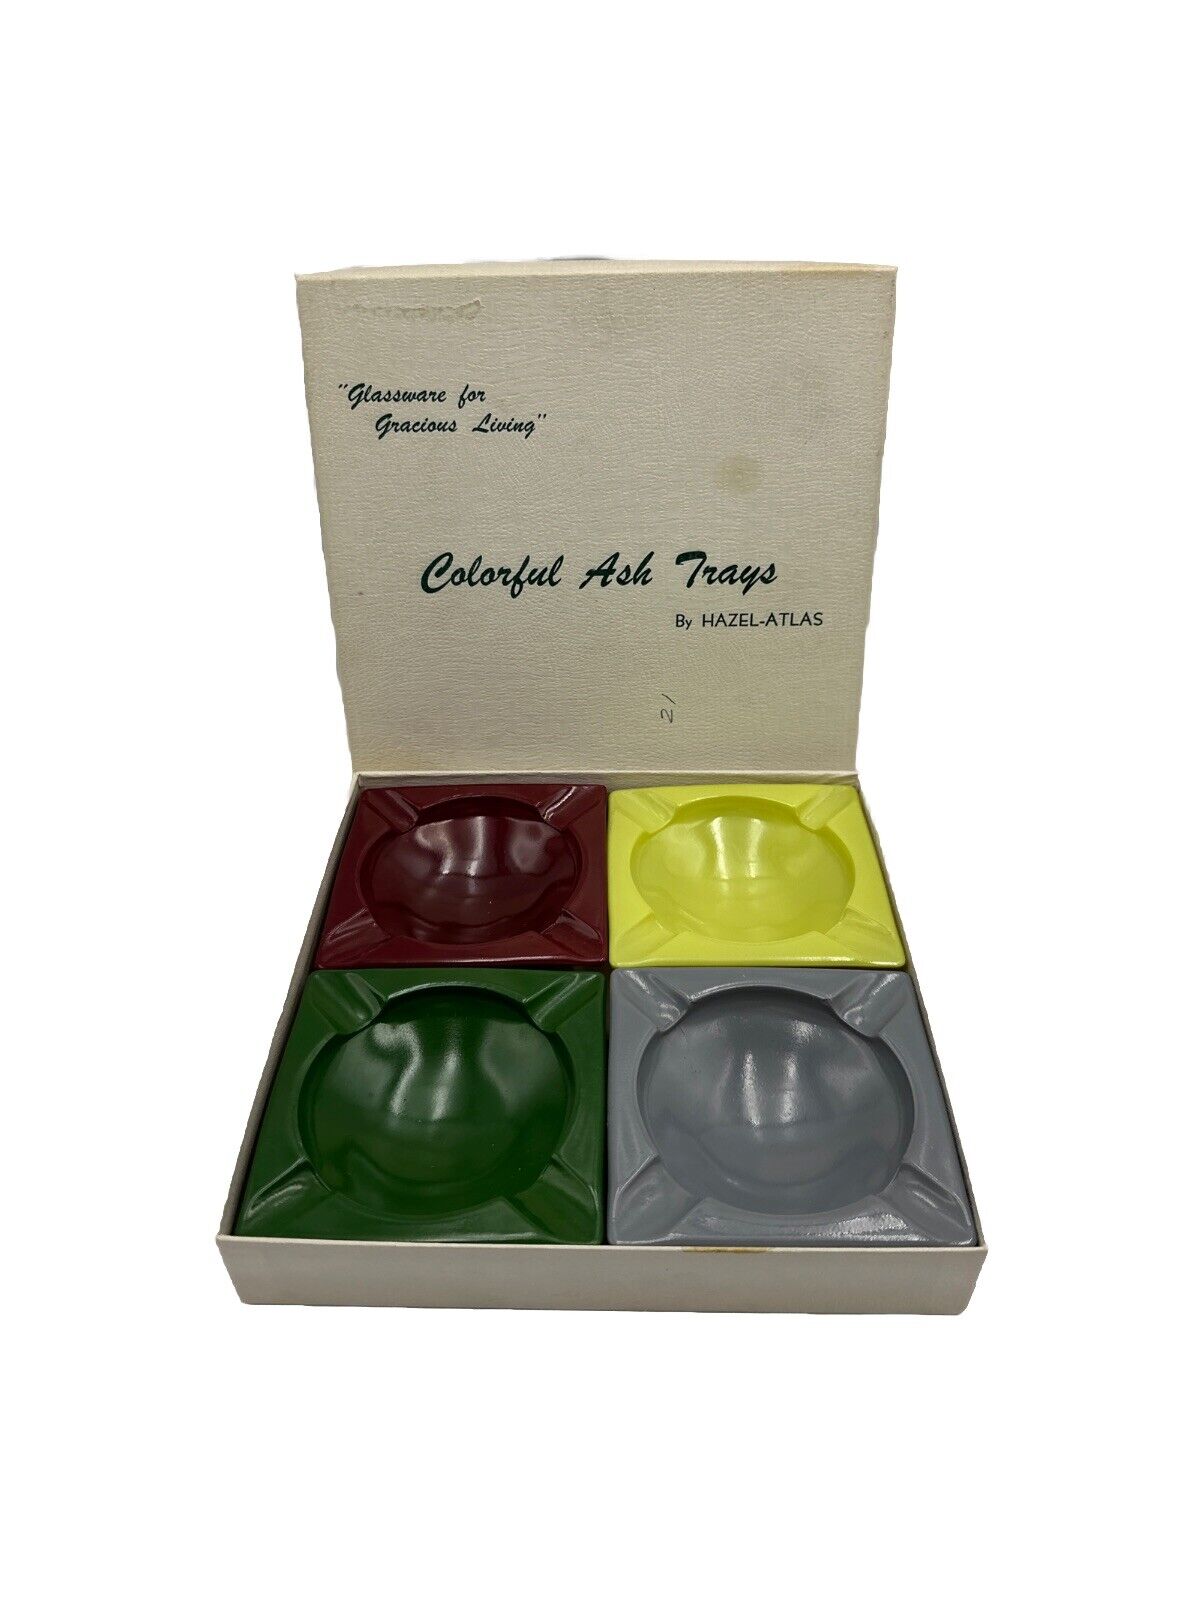 Vintage Hazel-Atlas Colorful Ash Trays 4 in Box Glassware for Gracious Living